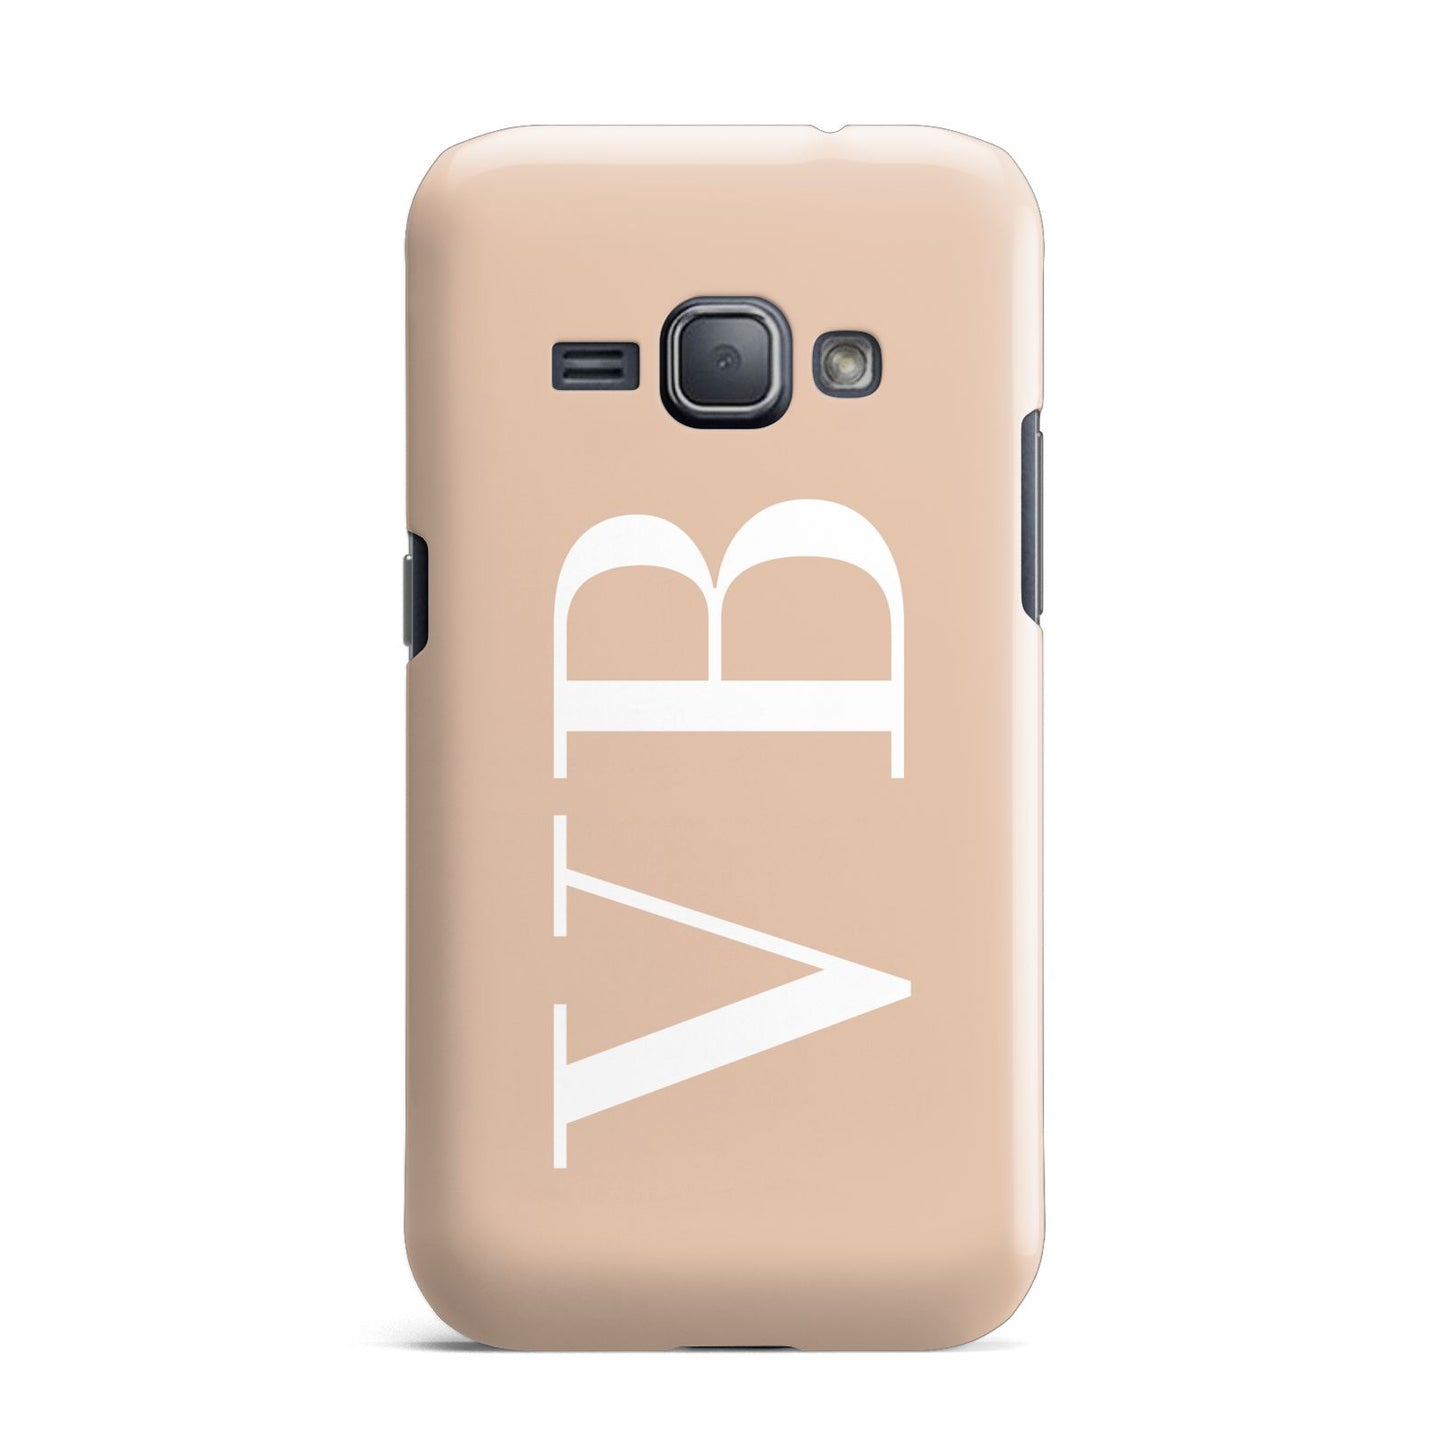 Nude And White Personalised Samsung Galaxy J1 2016 Case